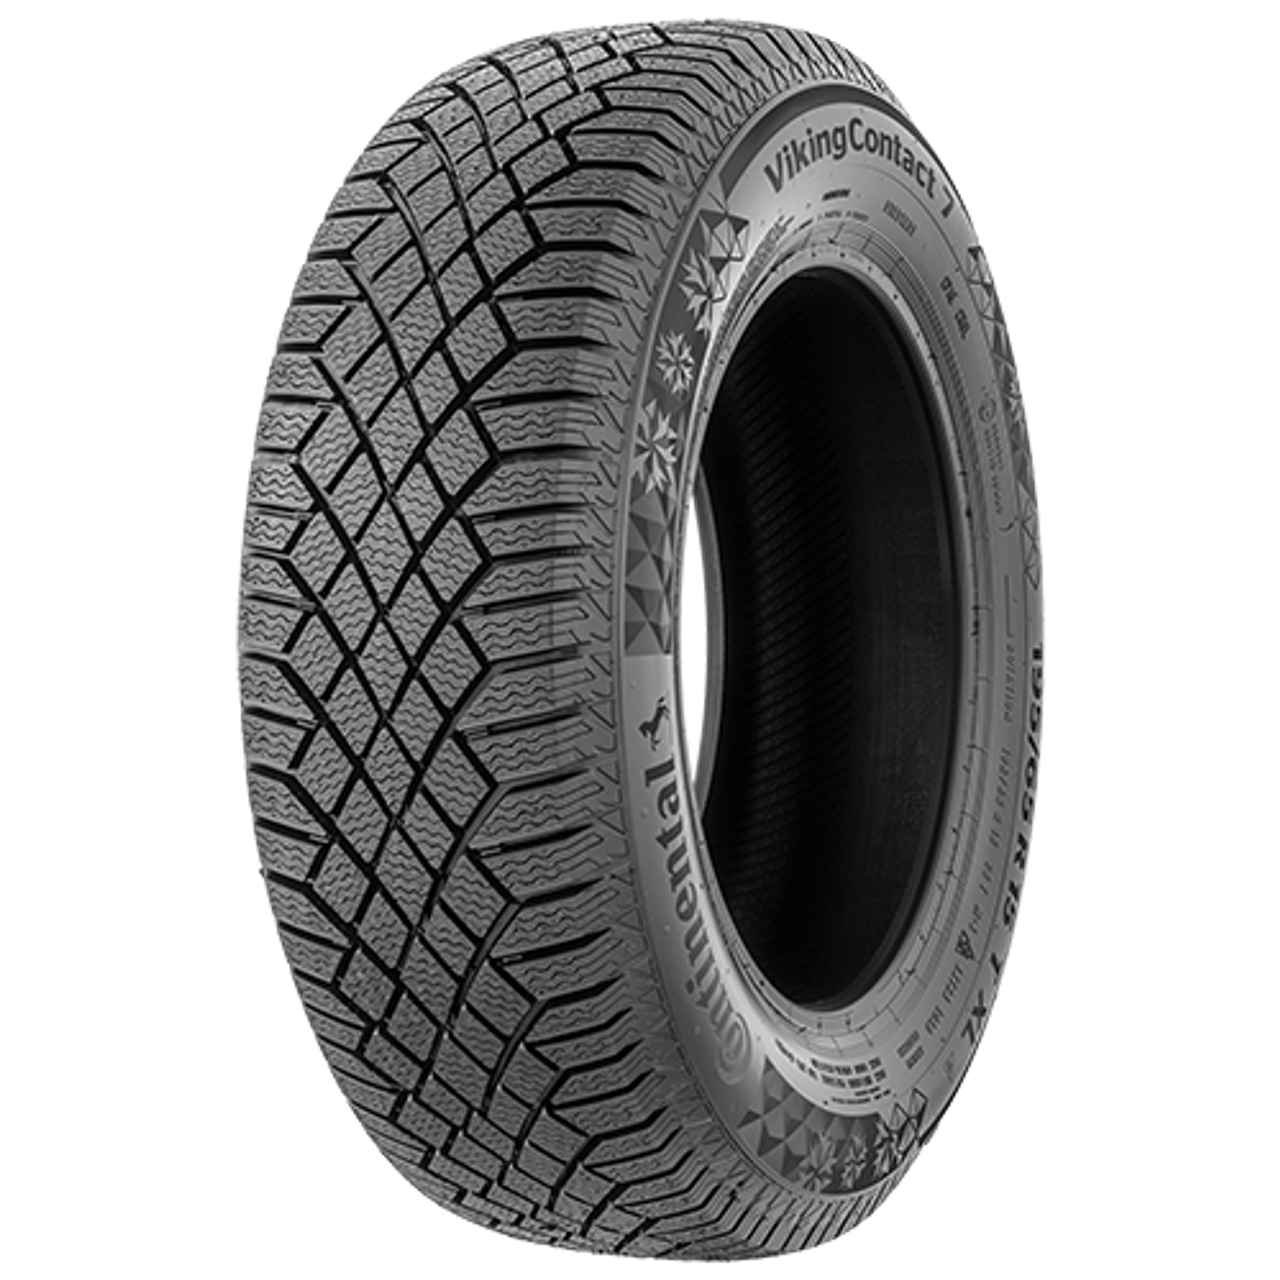 CONTINENTAL VIKINGCONTACT 7 235/45R18 98T NORDIC COMPOUND FR BSW